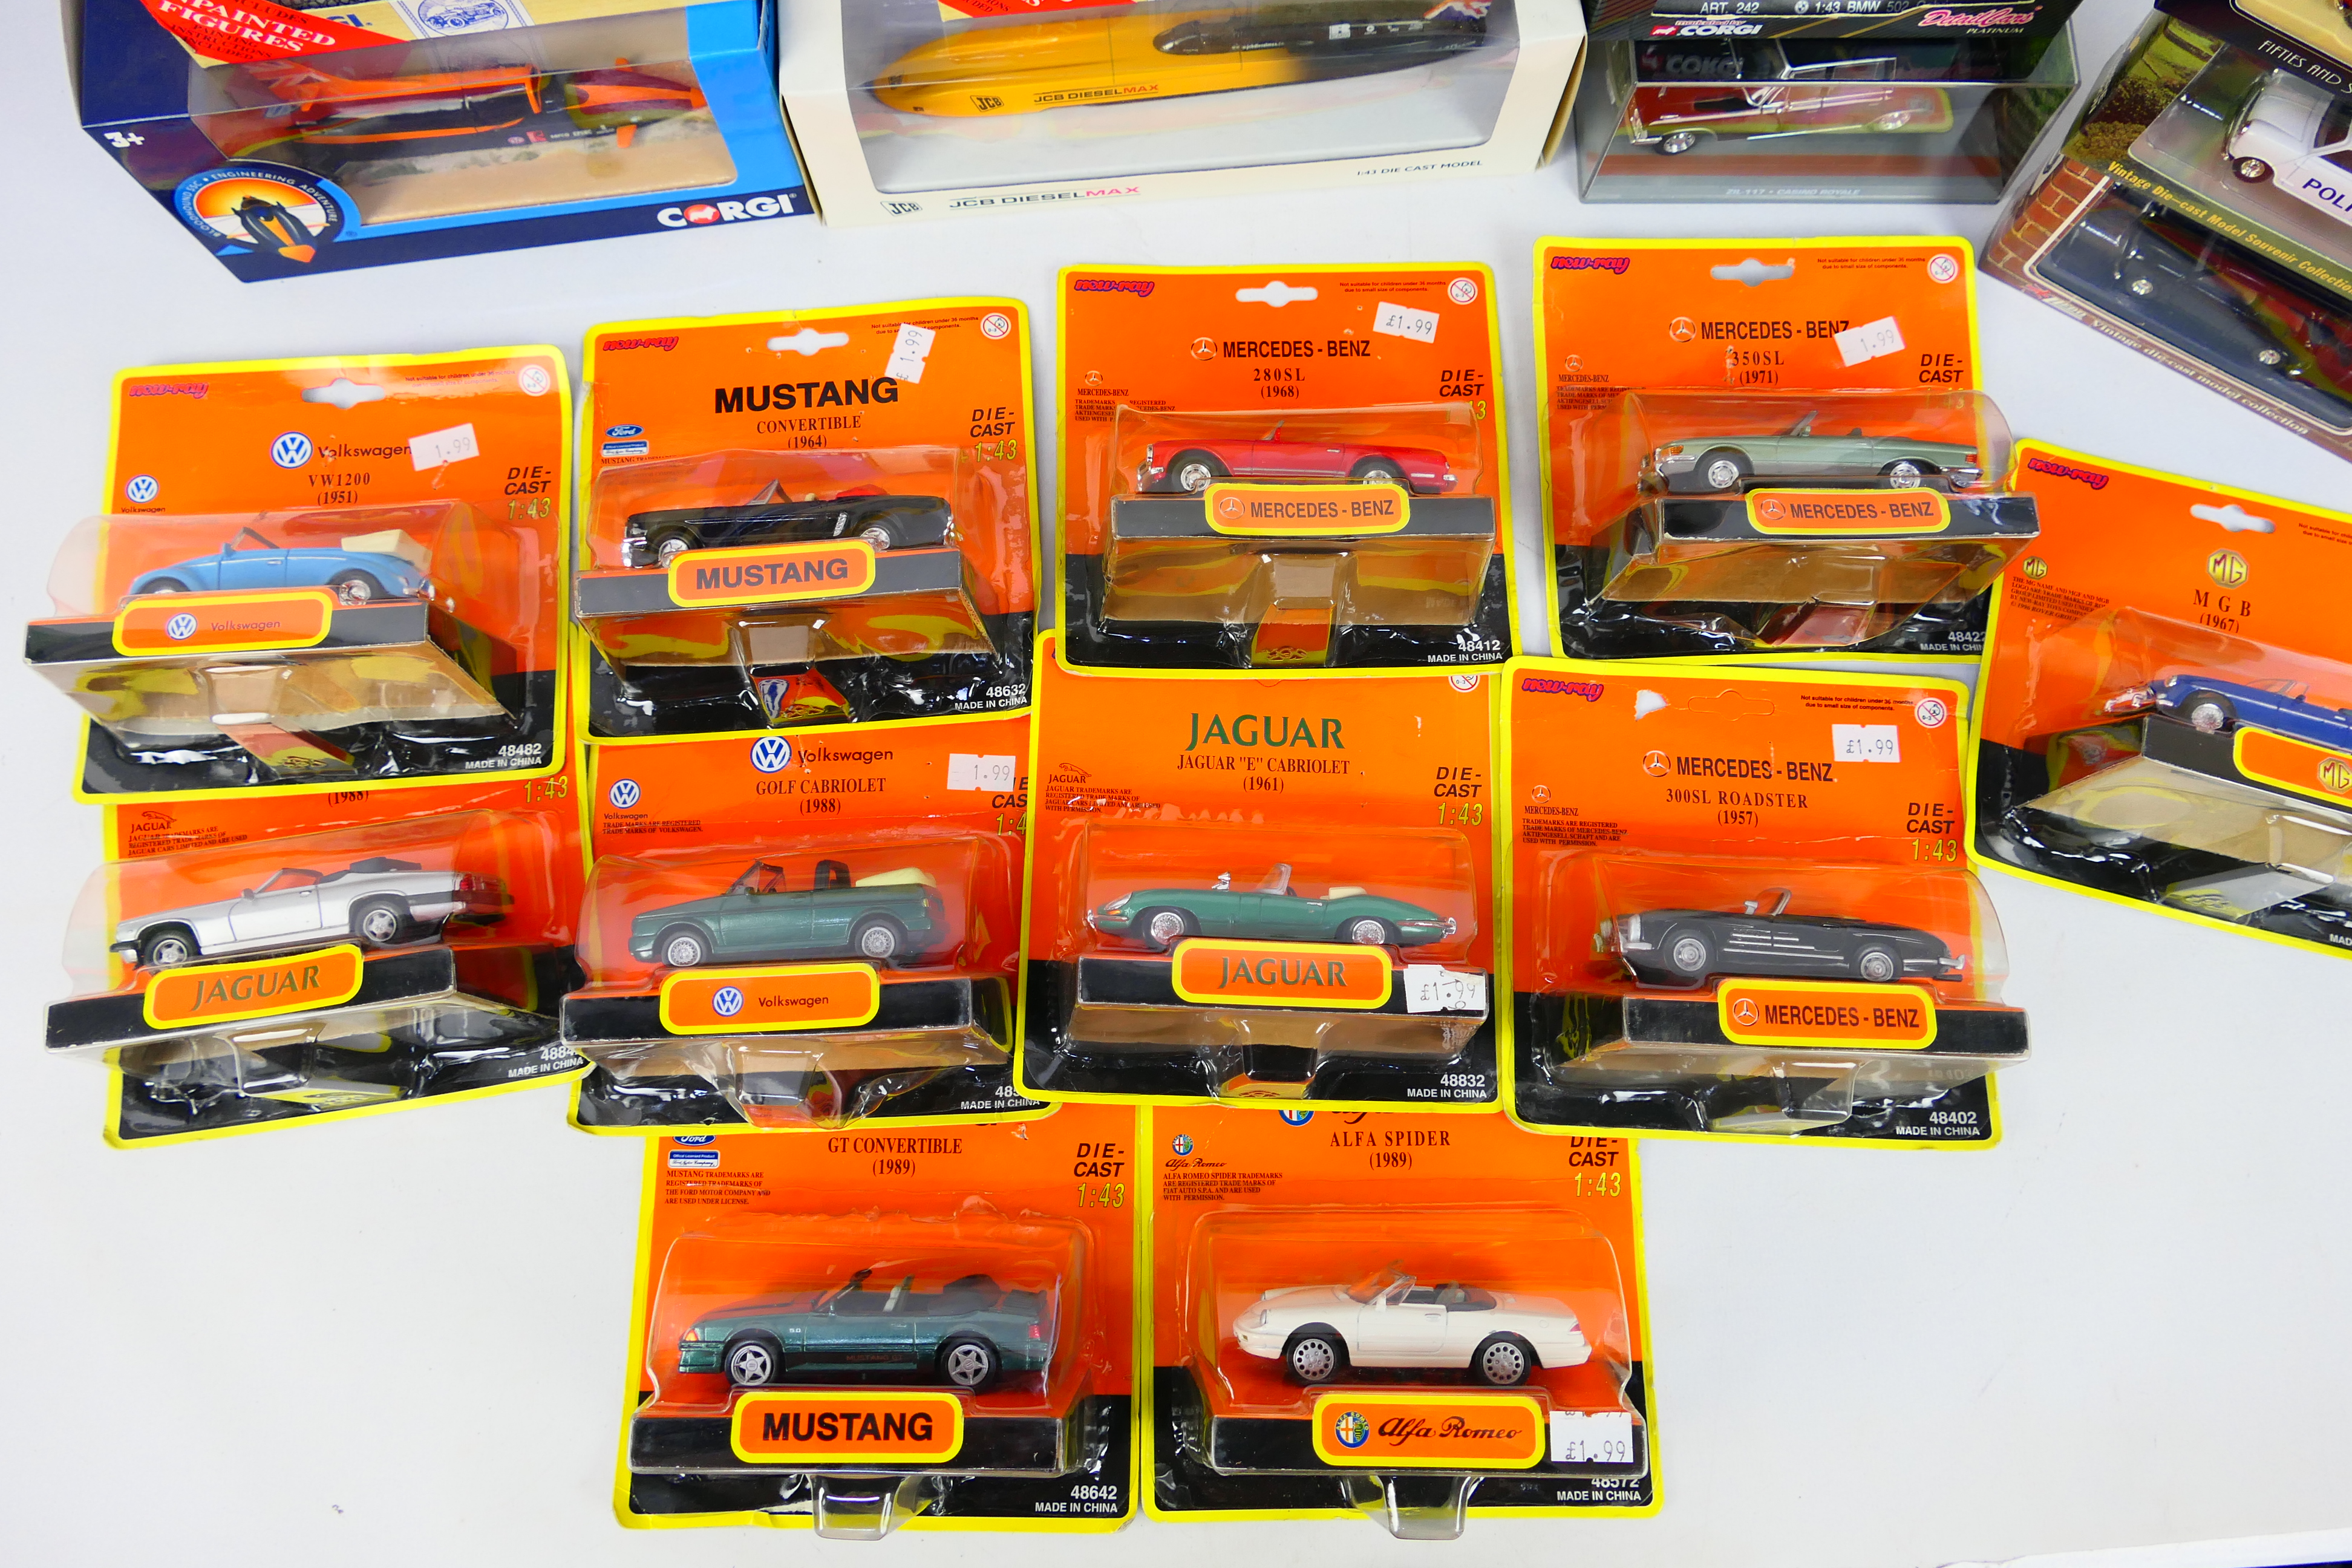 Bburago - Corgi - Matchbox Dinky - Vanguards - Other - Over 20 boxed diecast model vehicles in - Image 4 of 4